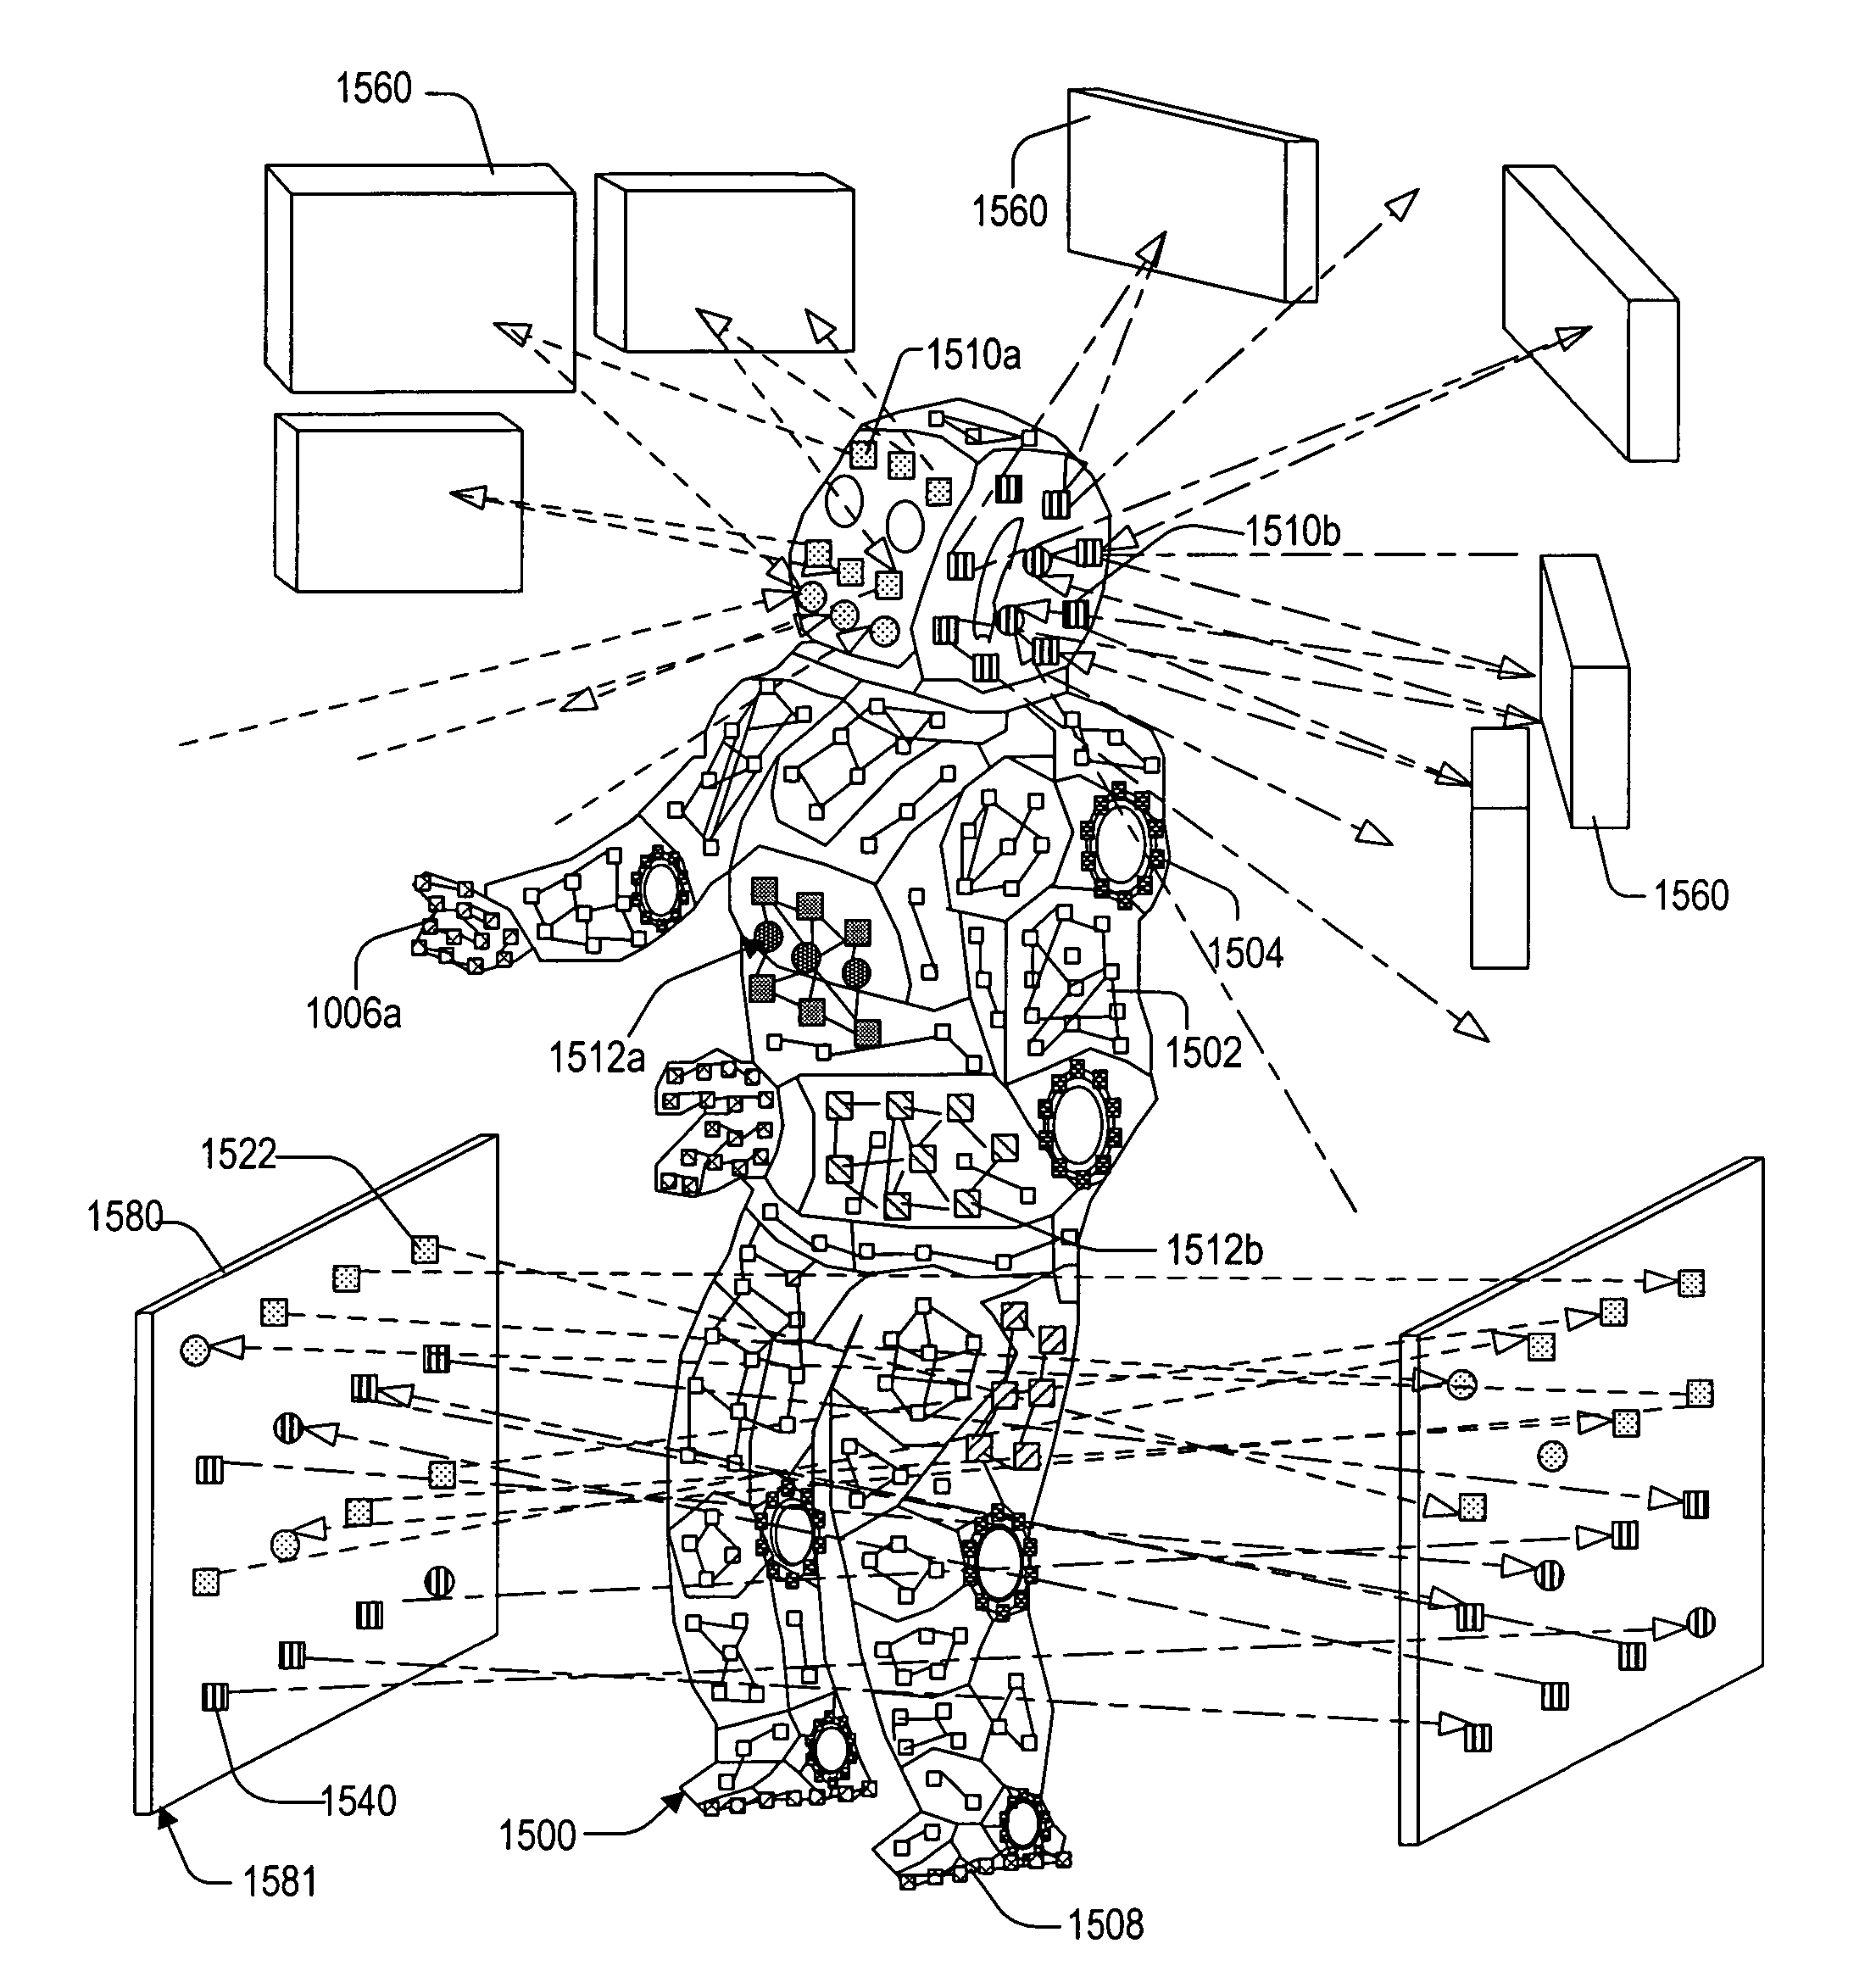 Methods of networking interrogation devices for structural conditions